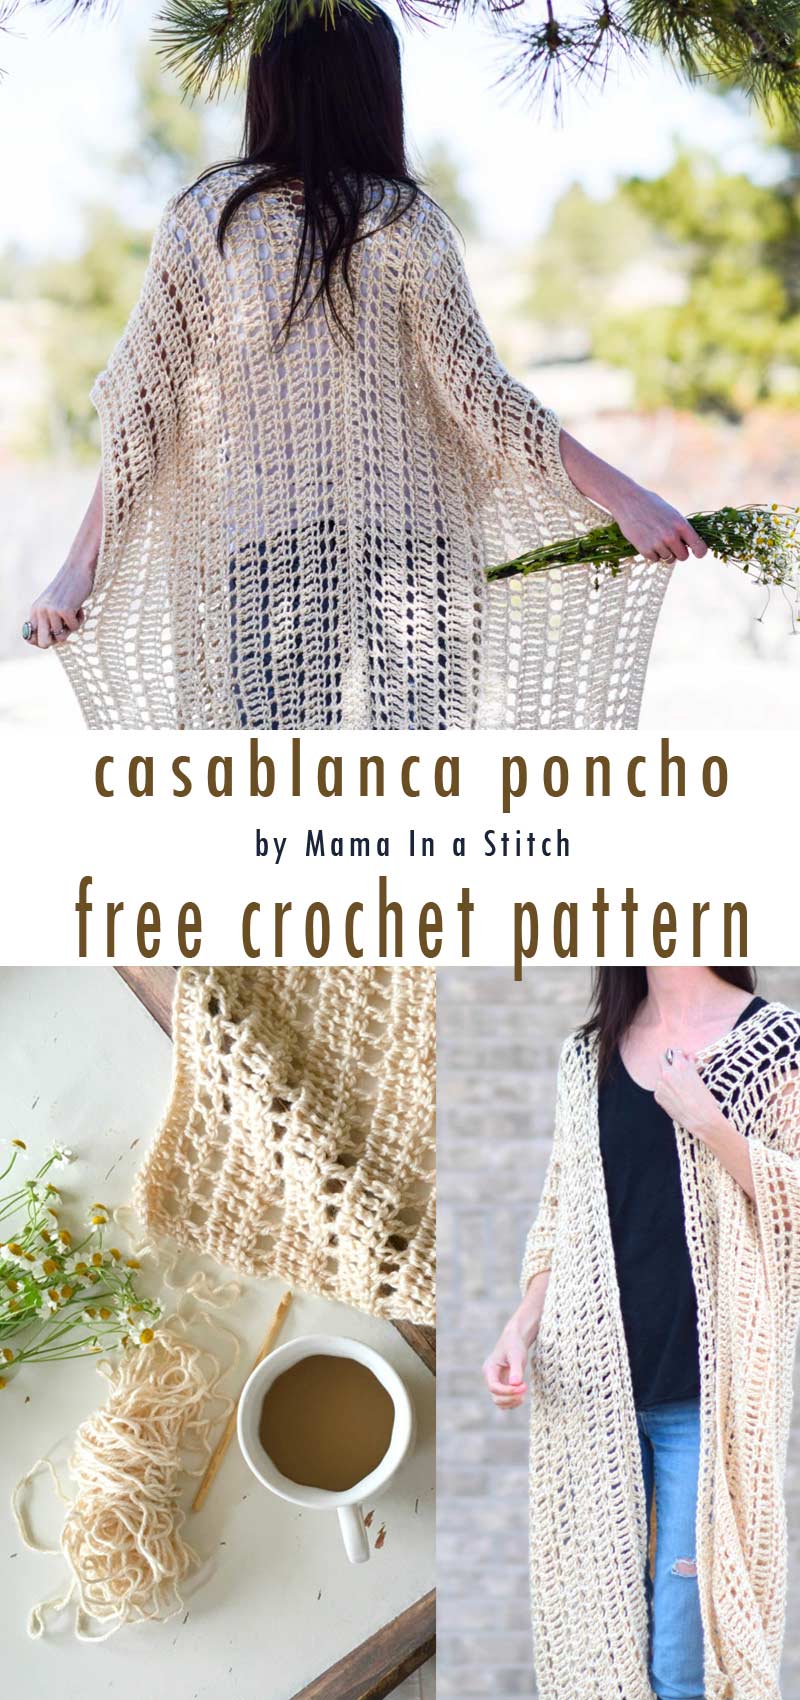 easy crochet projects for spring and summer by craft-mart.com - crochet poncho with free pattern